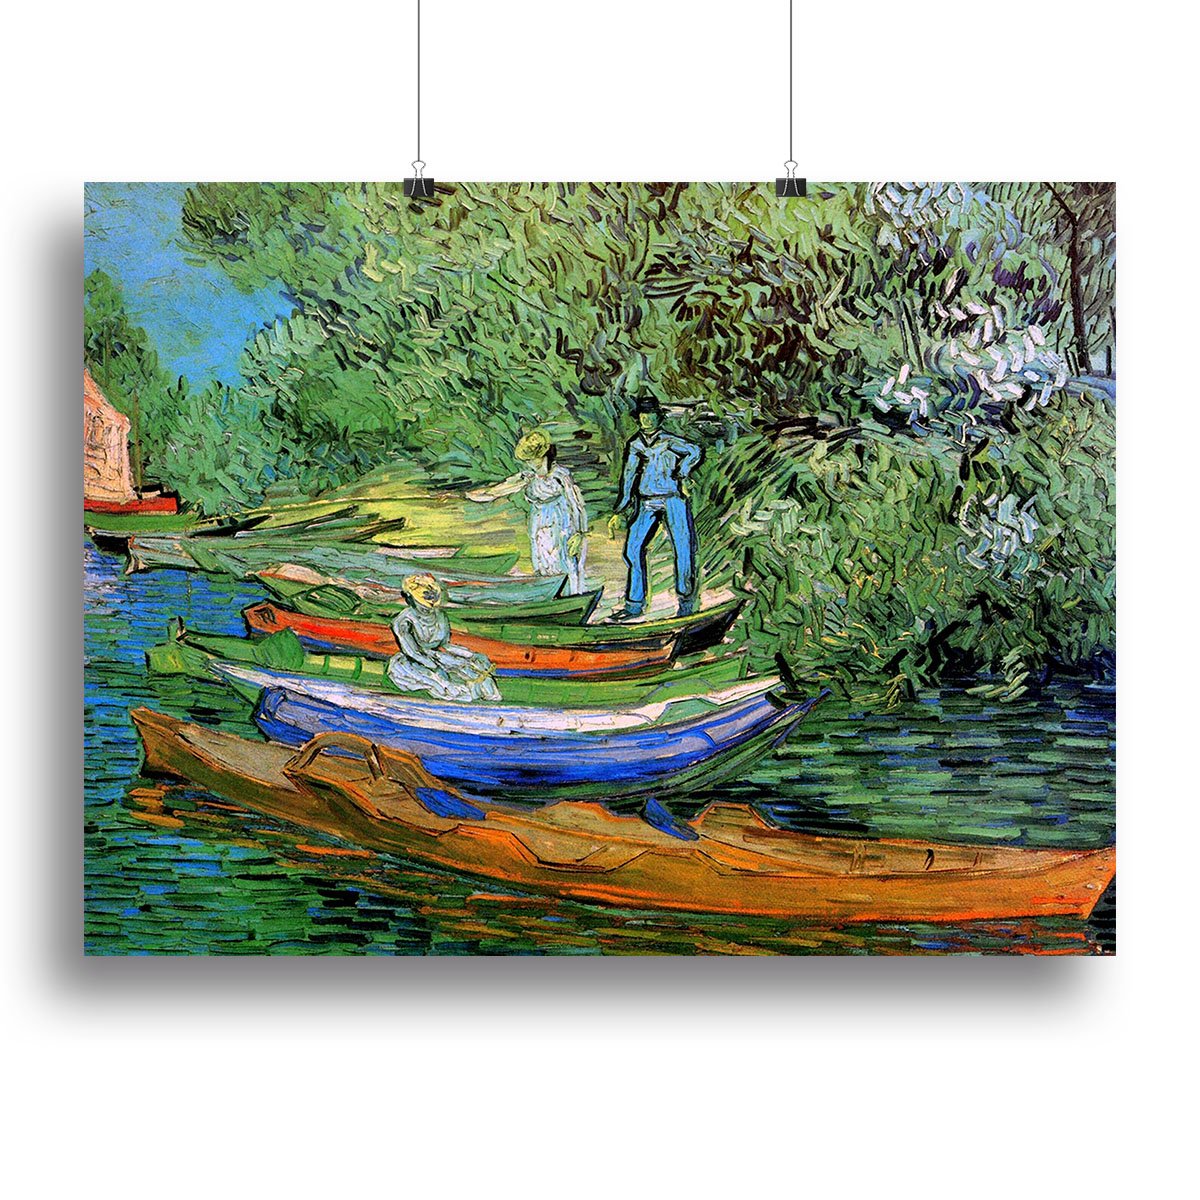 Bank of the Oise at Auvers by Van Gogh Canvas Print or Poster